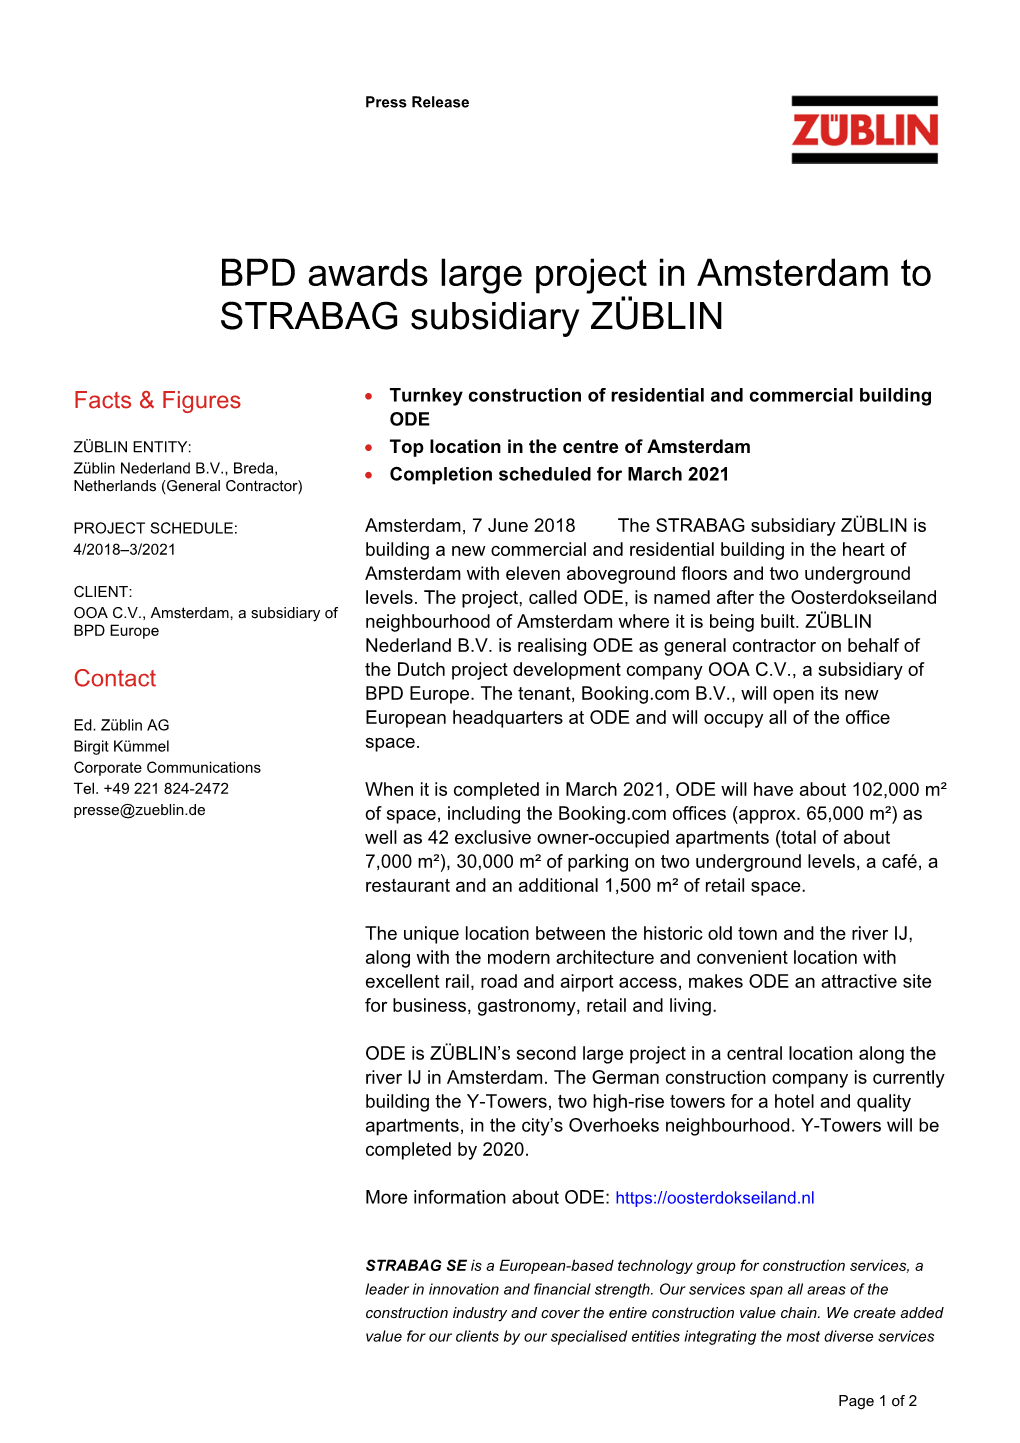 BPD Awards Large Project in Amsterdam to STRABAG Subsidiary ZÜBLIN